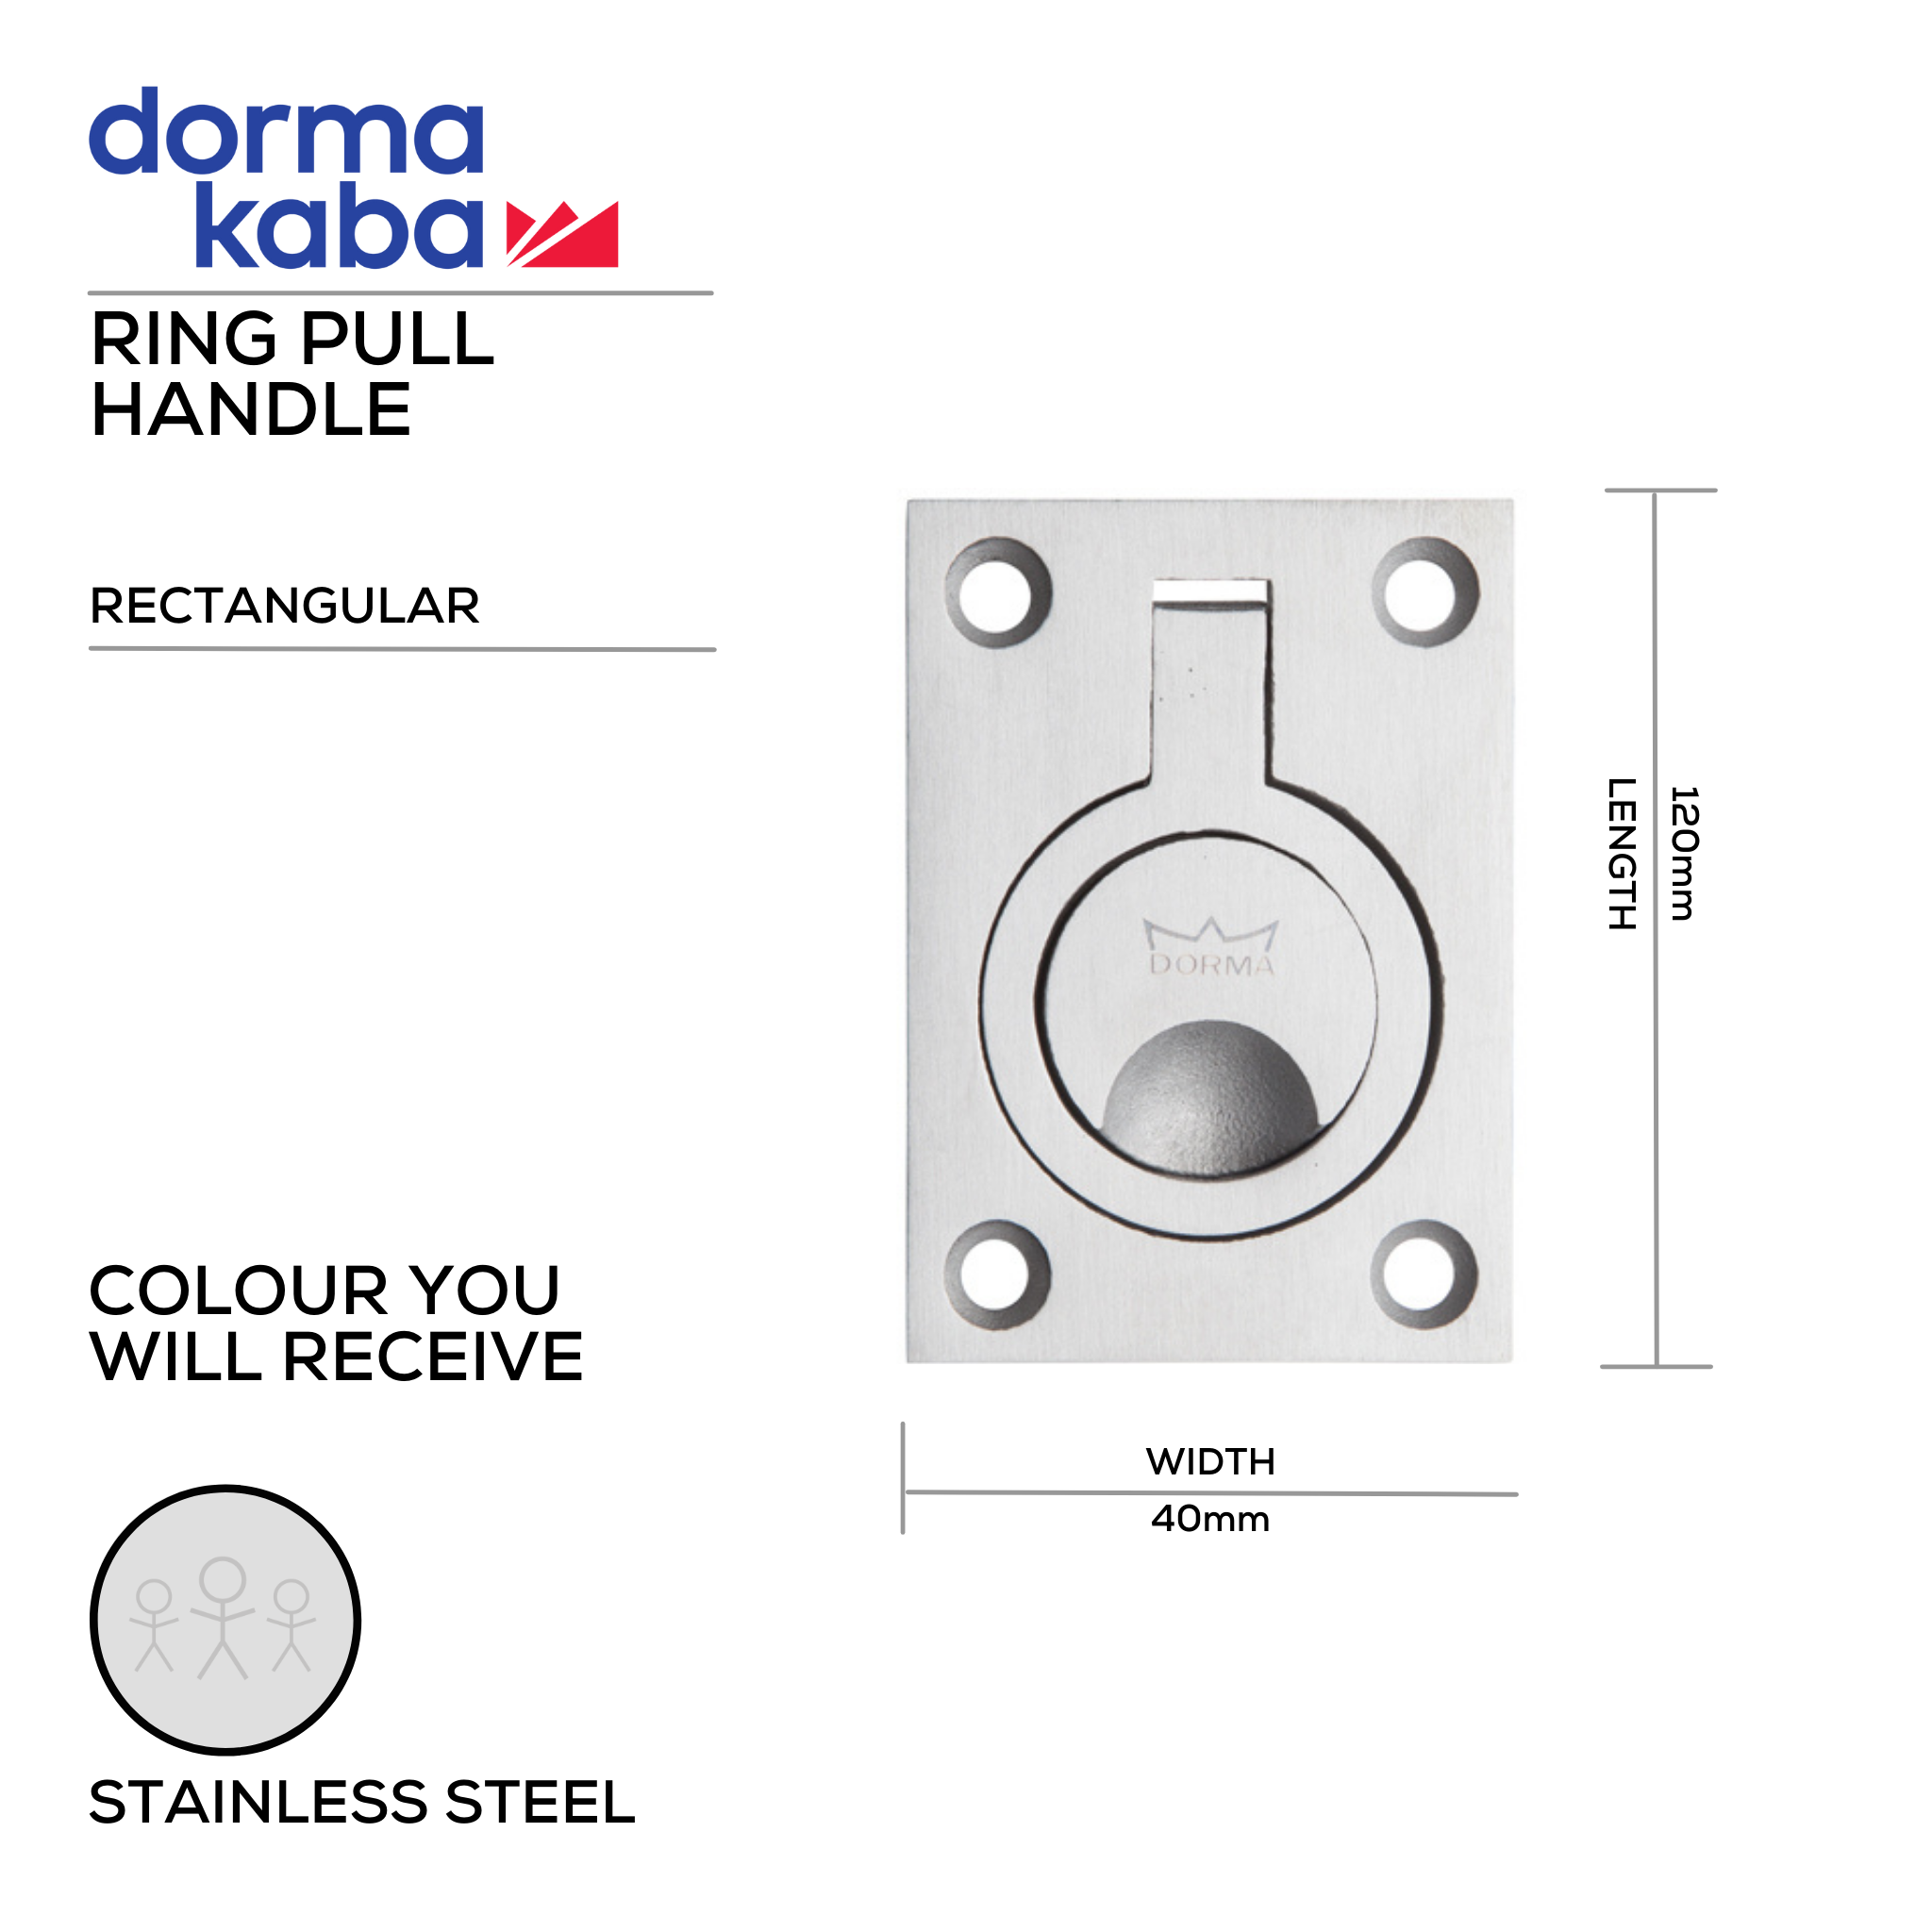 DRP-SS-023, Pull Handle, Recessed, Flush, Ring, 62mm (l) x 44mm (w), Stainless Steel, DORMAKABA